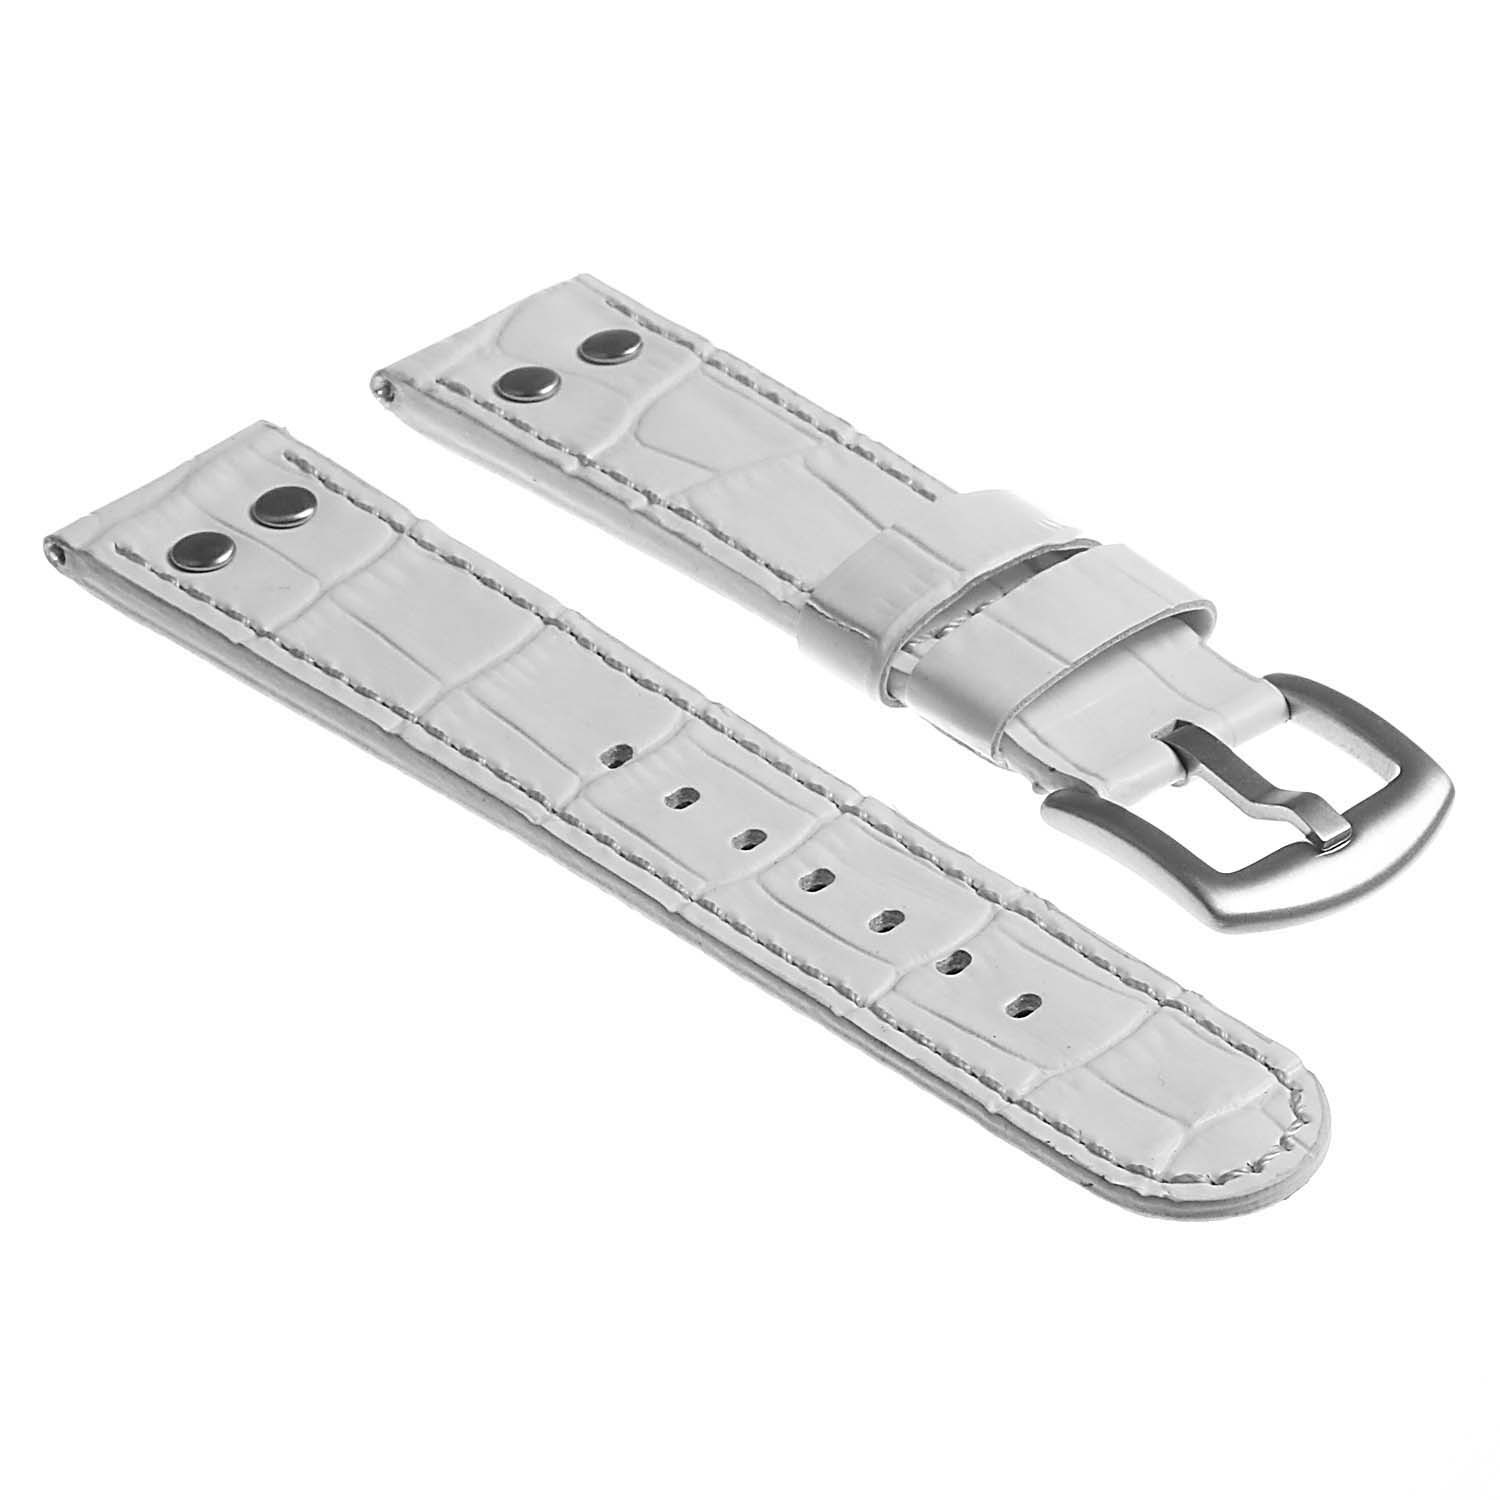 DASSARI Croc Embossed Leather Pilot Watch Band Strap for Samsung Galaxy Watch Active - White